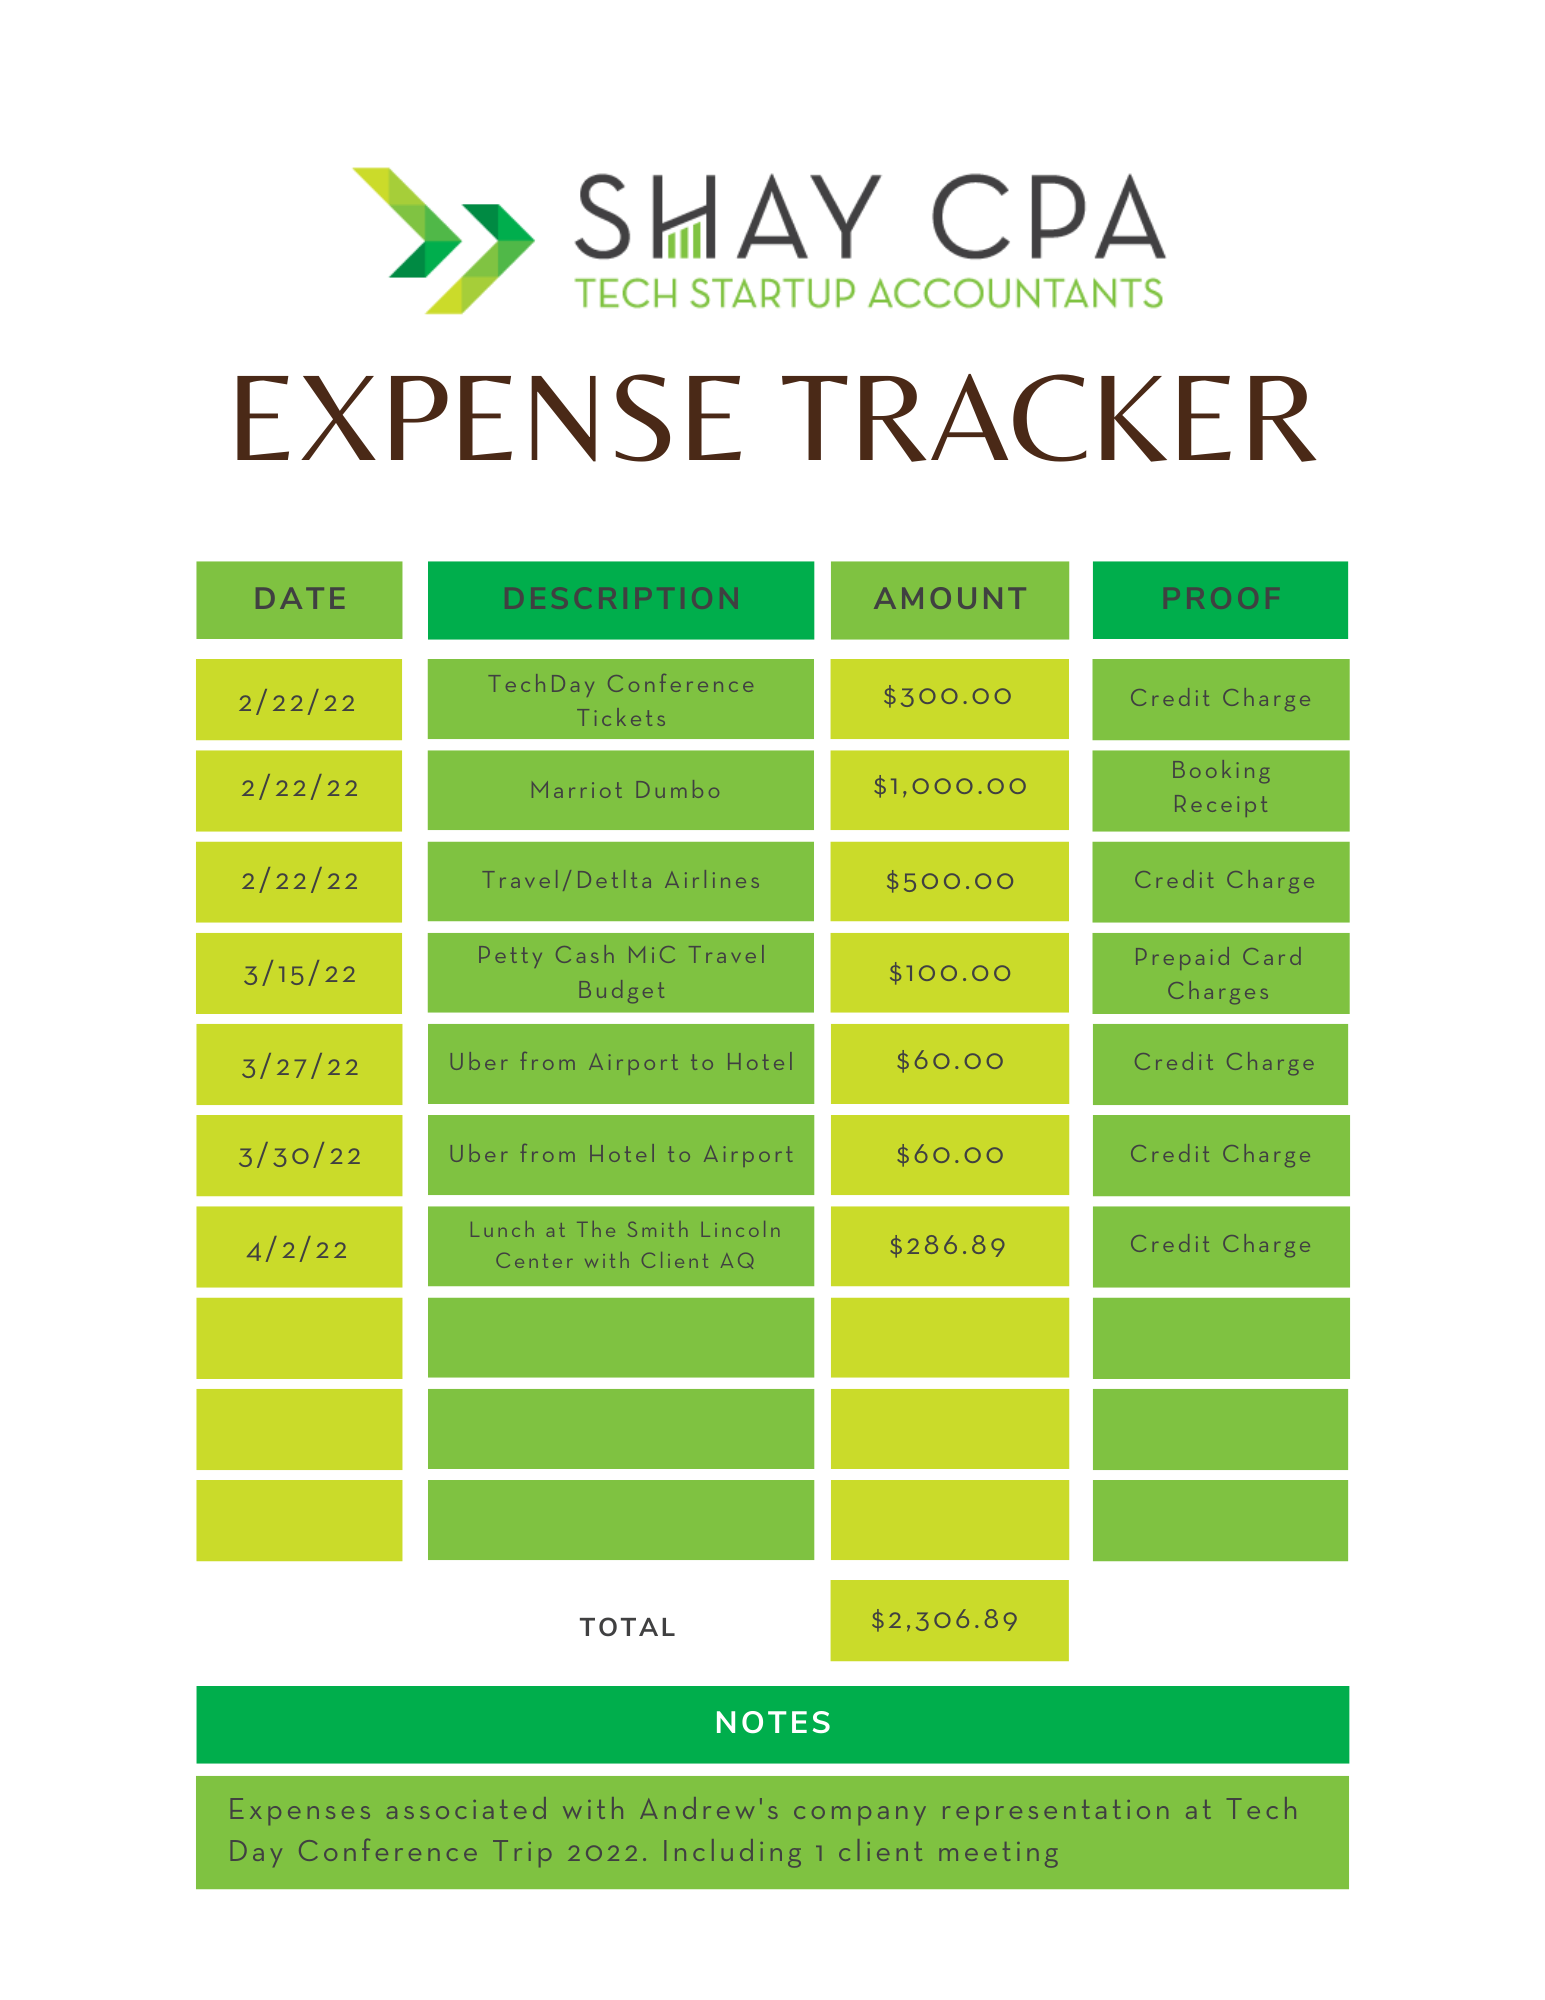 Example expense tracker chart which shows columns for date, description, amount, proof and a notes box